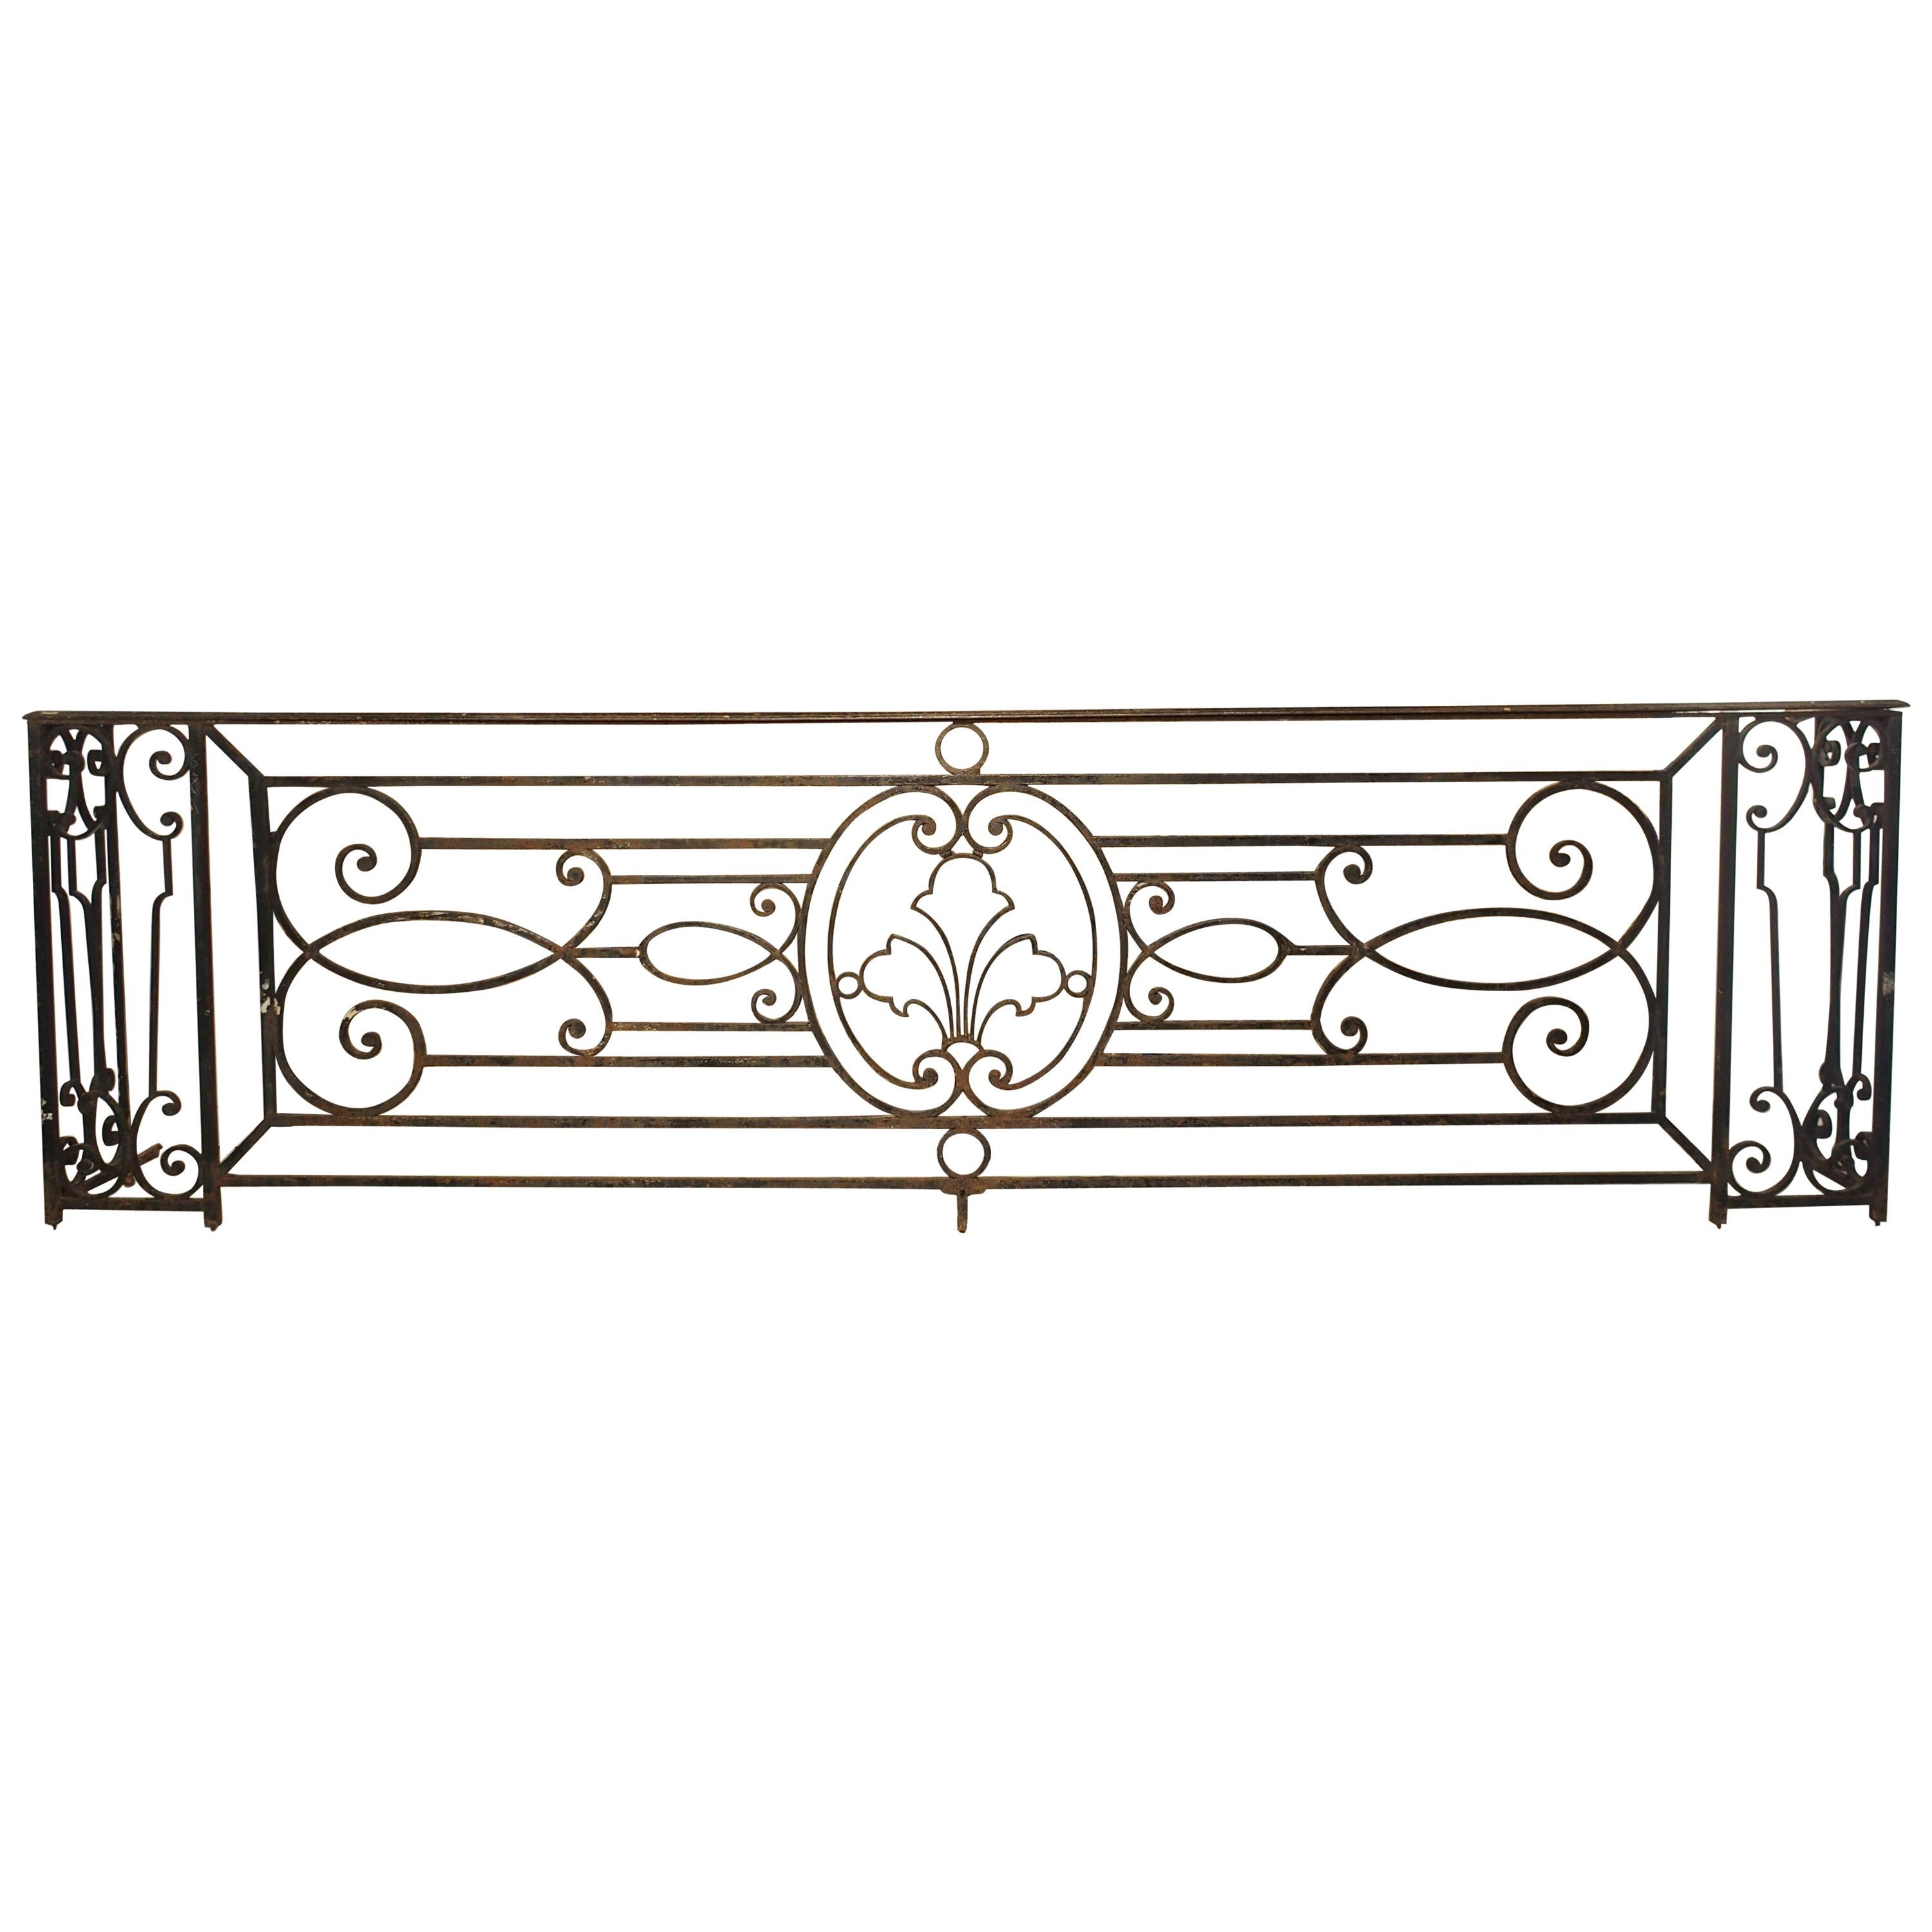 A Long Belle Époque Antique Wrought Iron Balcony Gate from Argentina